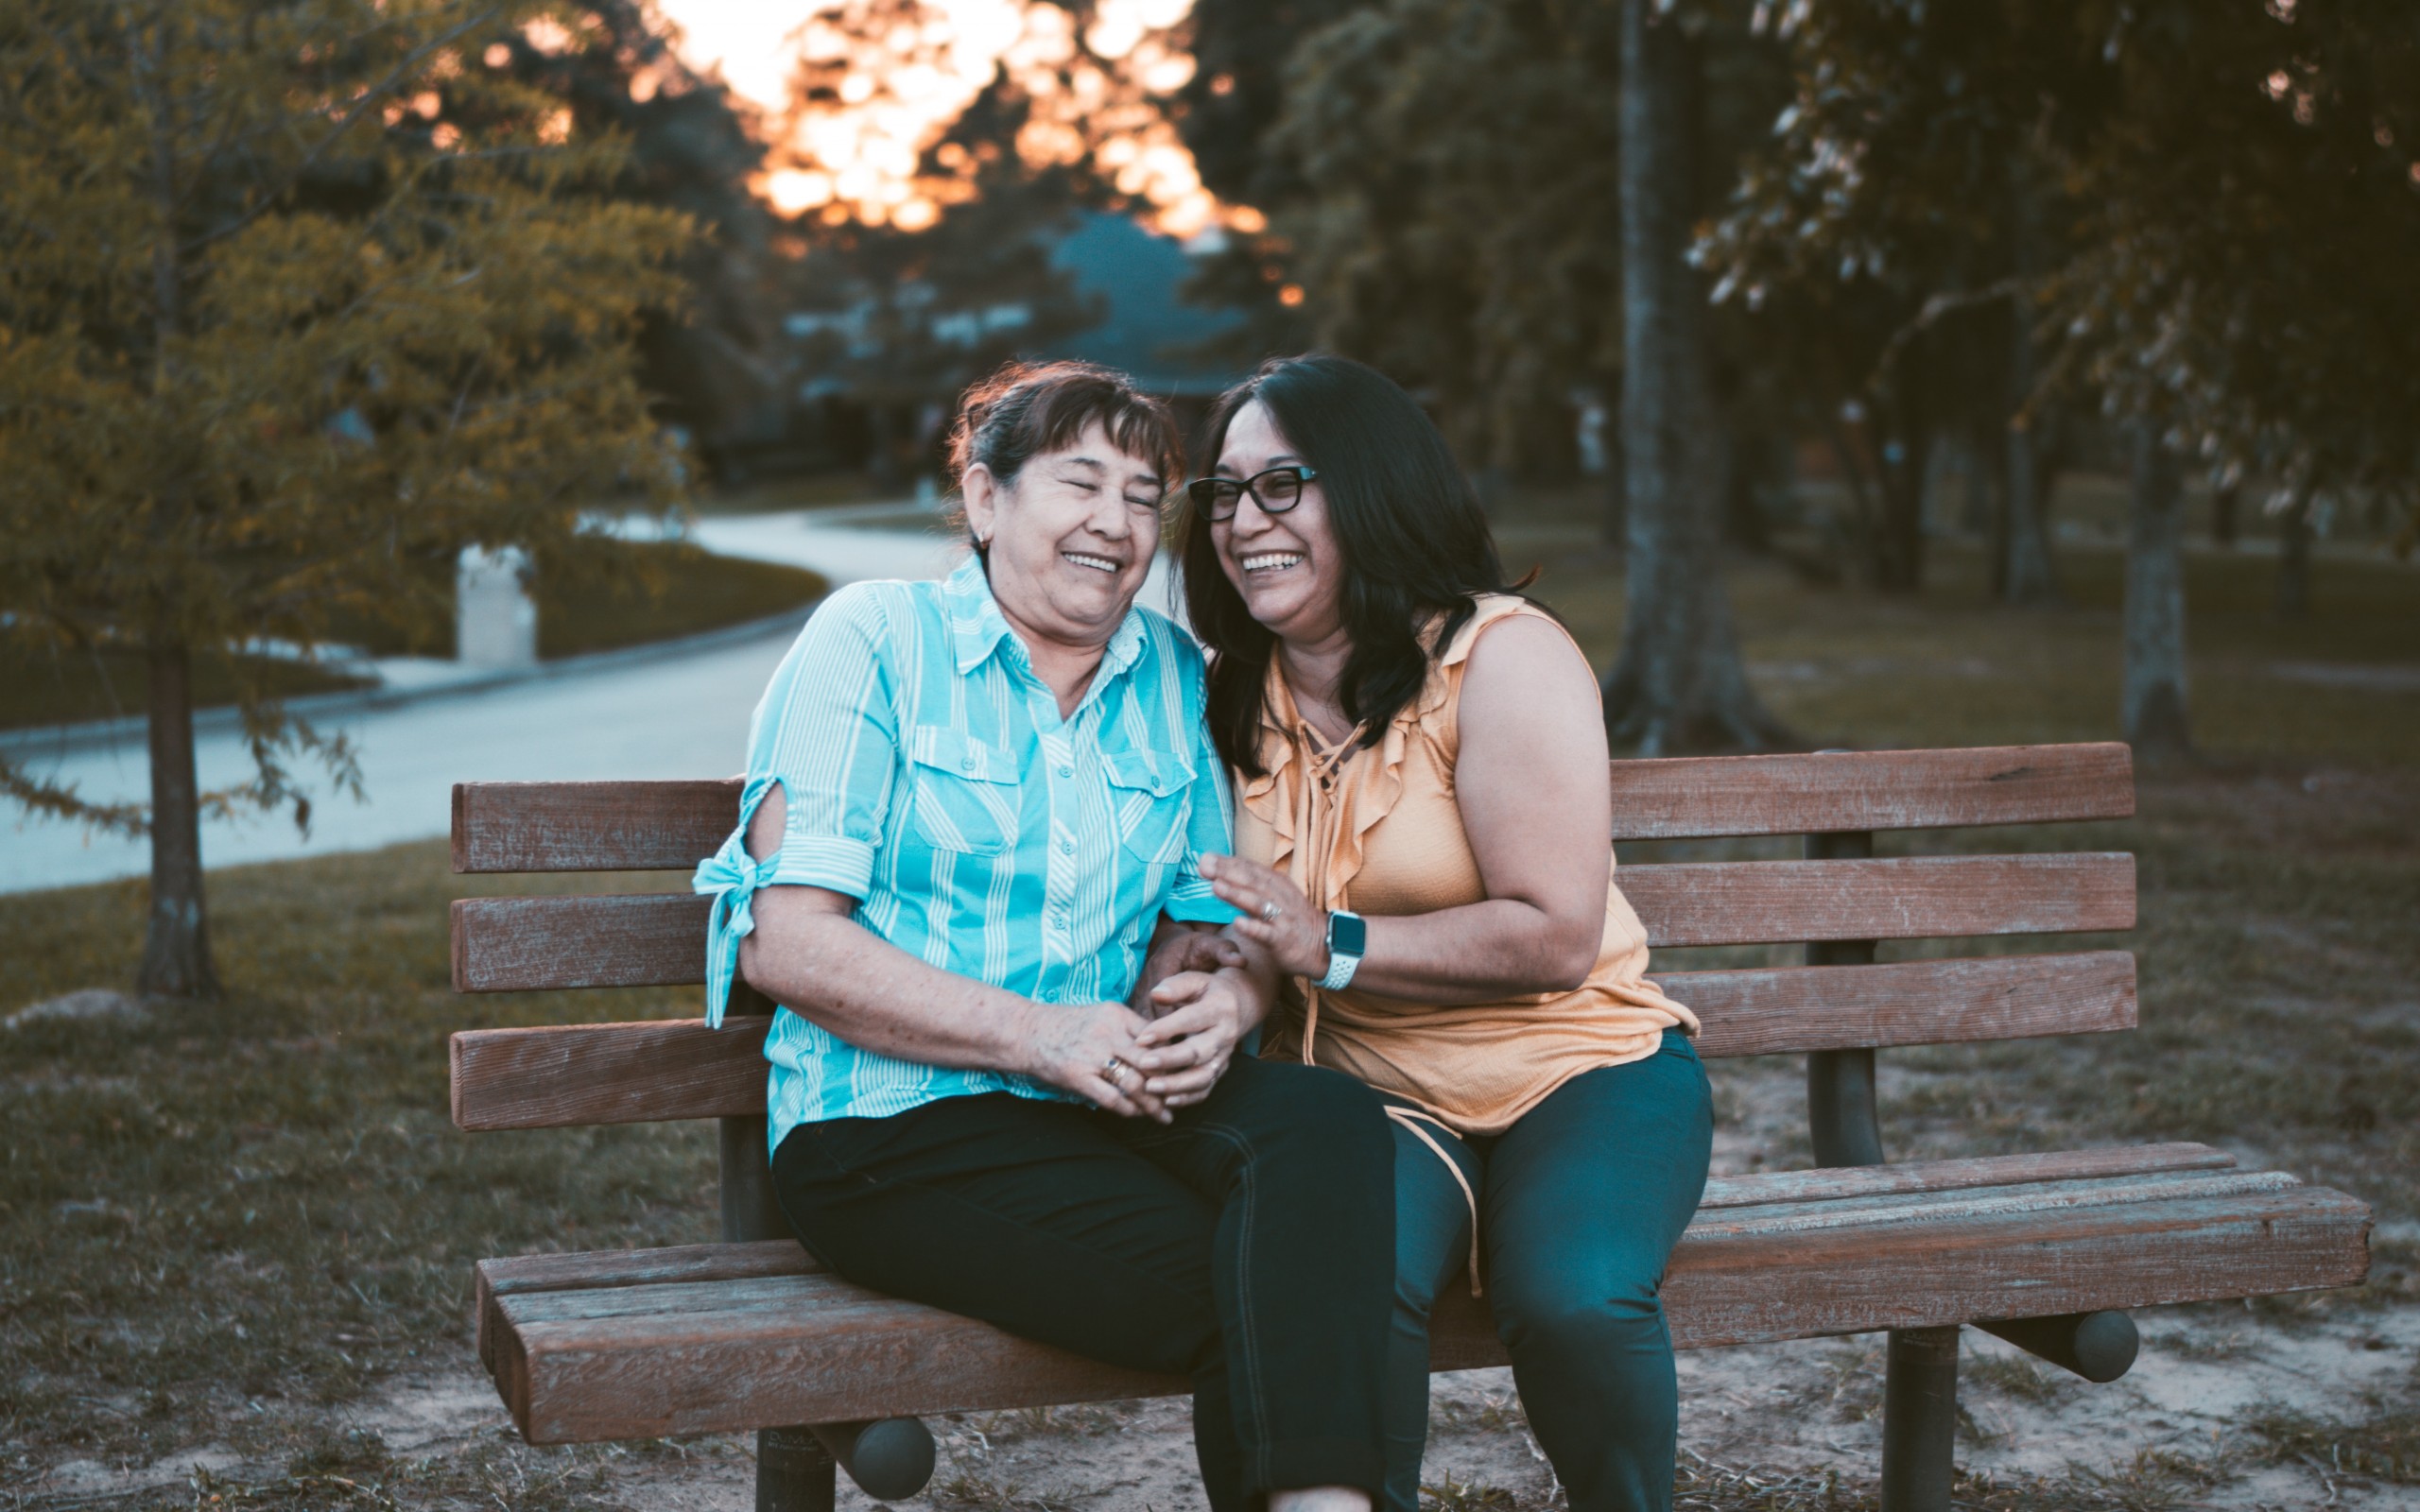 Two woman sitting on a bench smiling